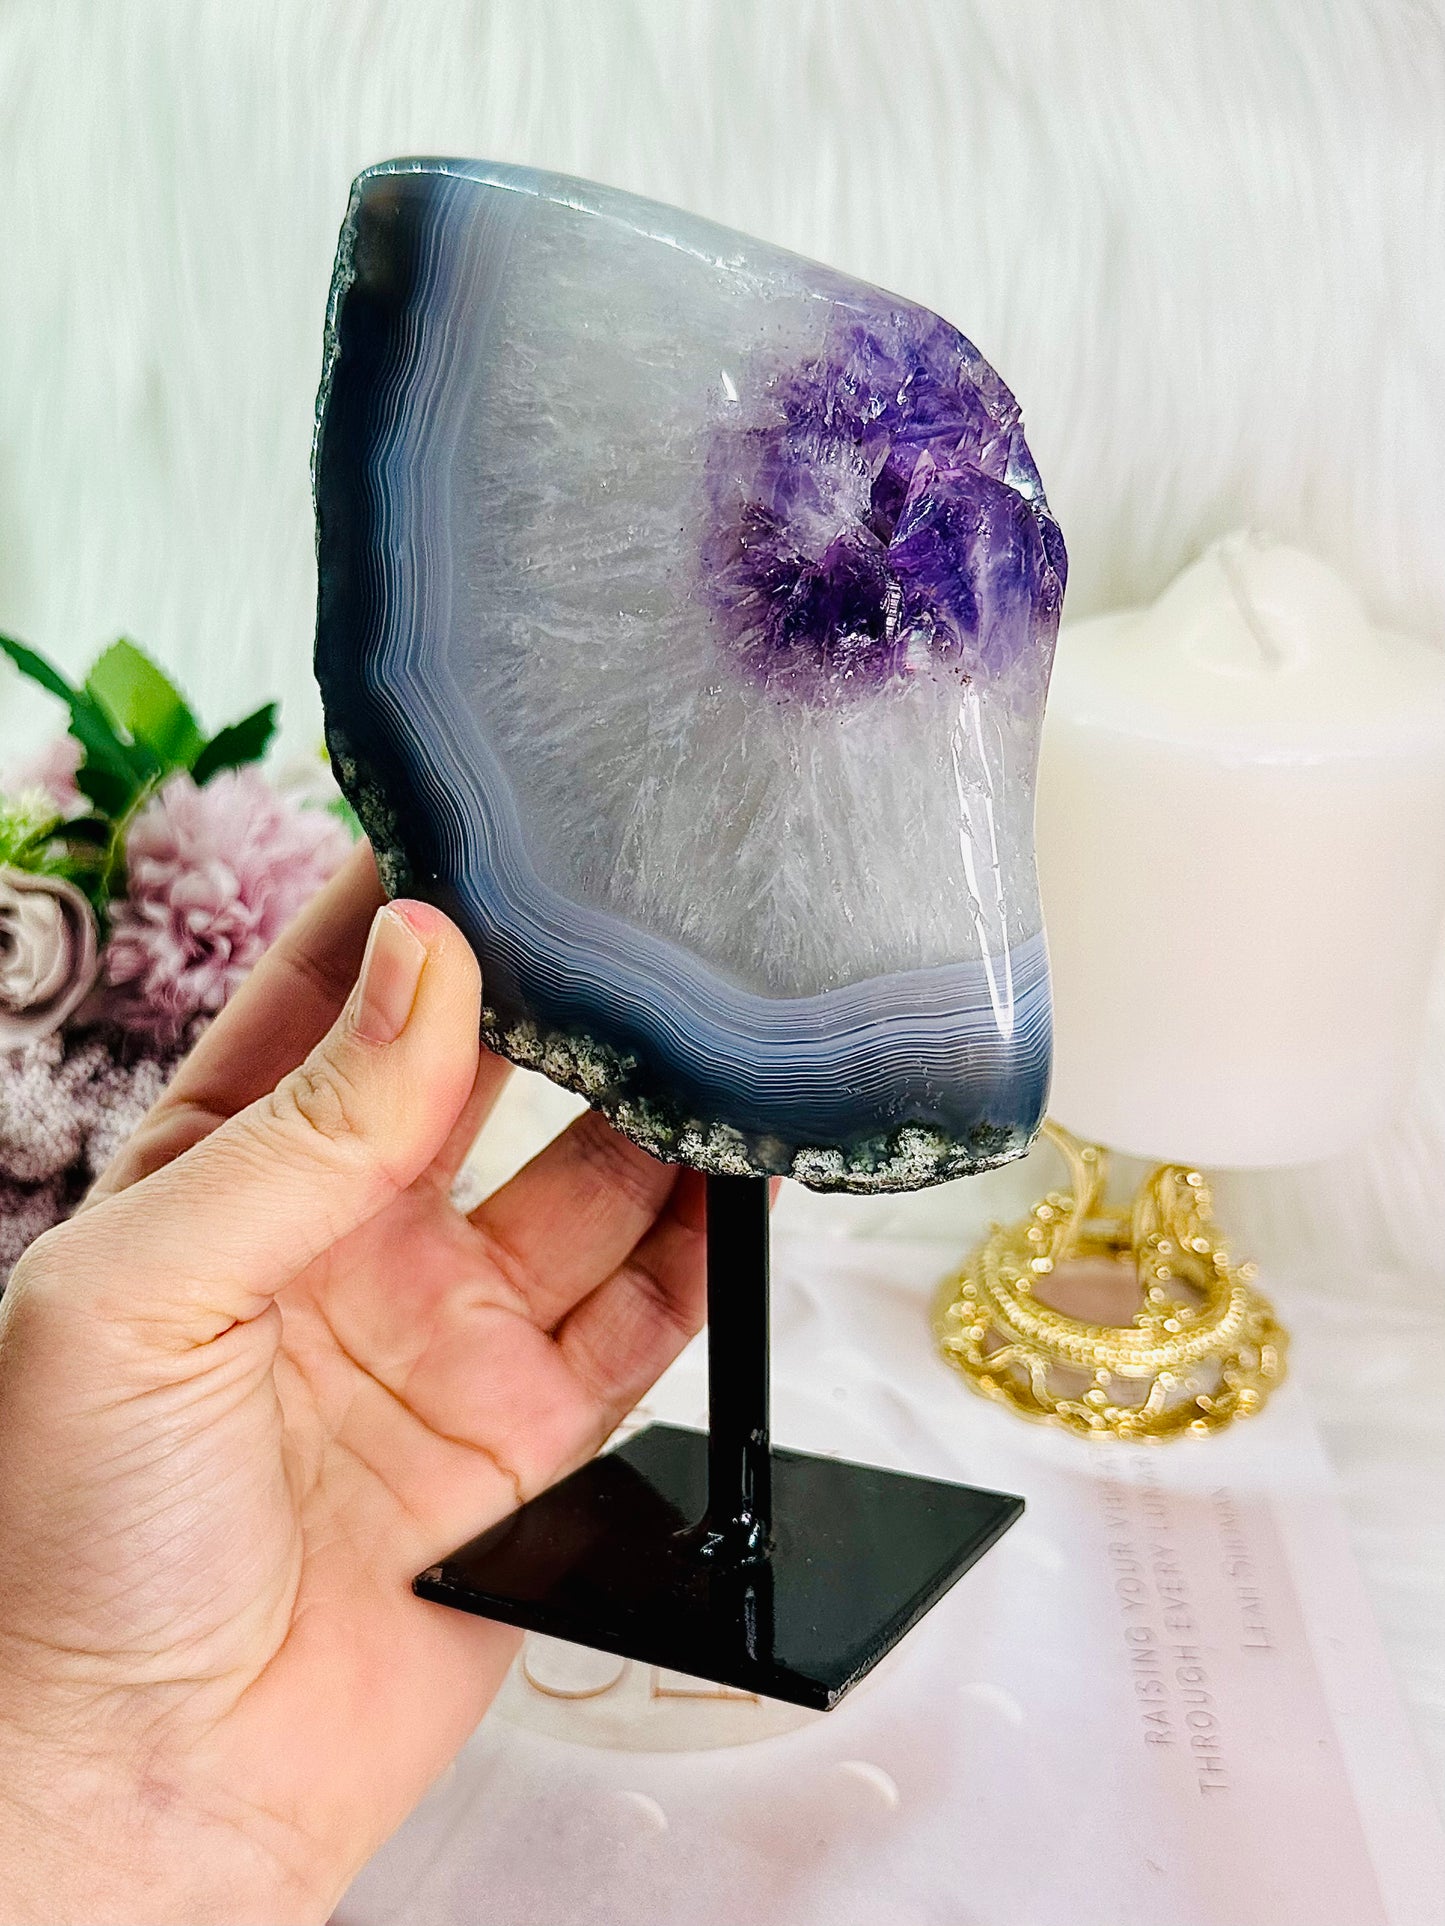 WOW! Absolutely Gorgeous Large 977gram Amethyst Agate Polished Freeform On Stand From Uruguay